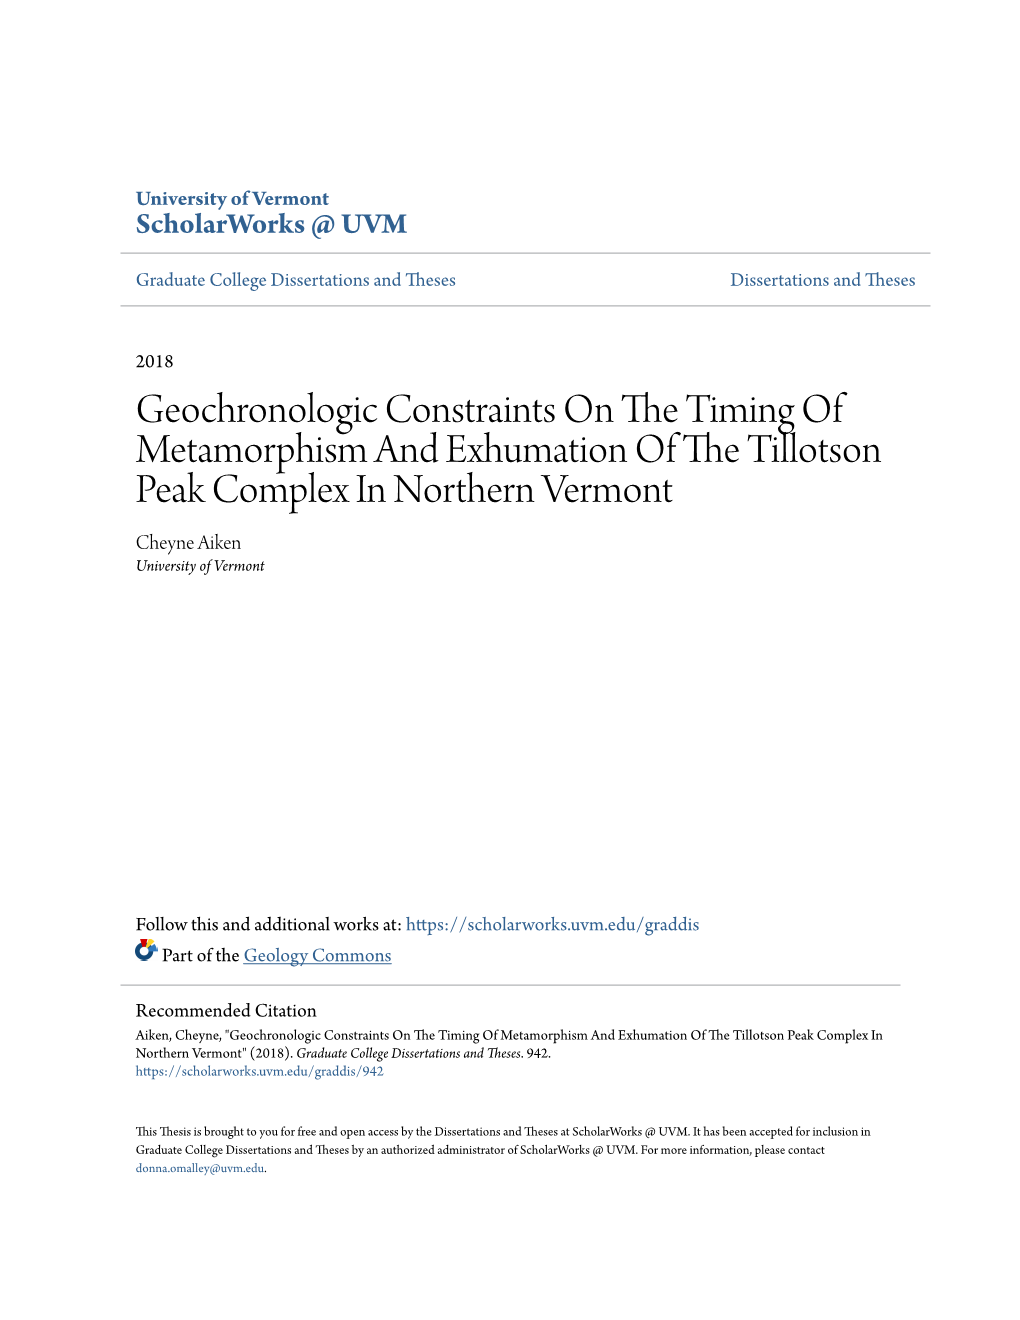 Geochronologic Constraints on the Timing of Metamorphism and Exhumation of the Tillotson Peak Complex in Northern Vermont